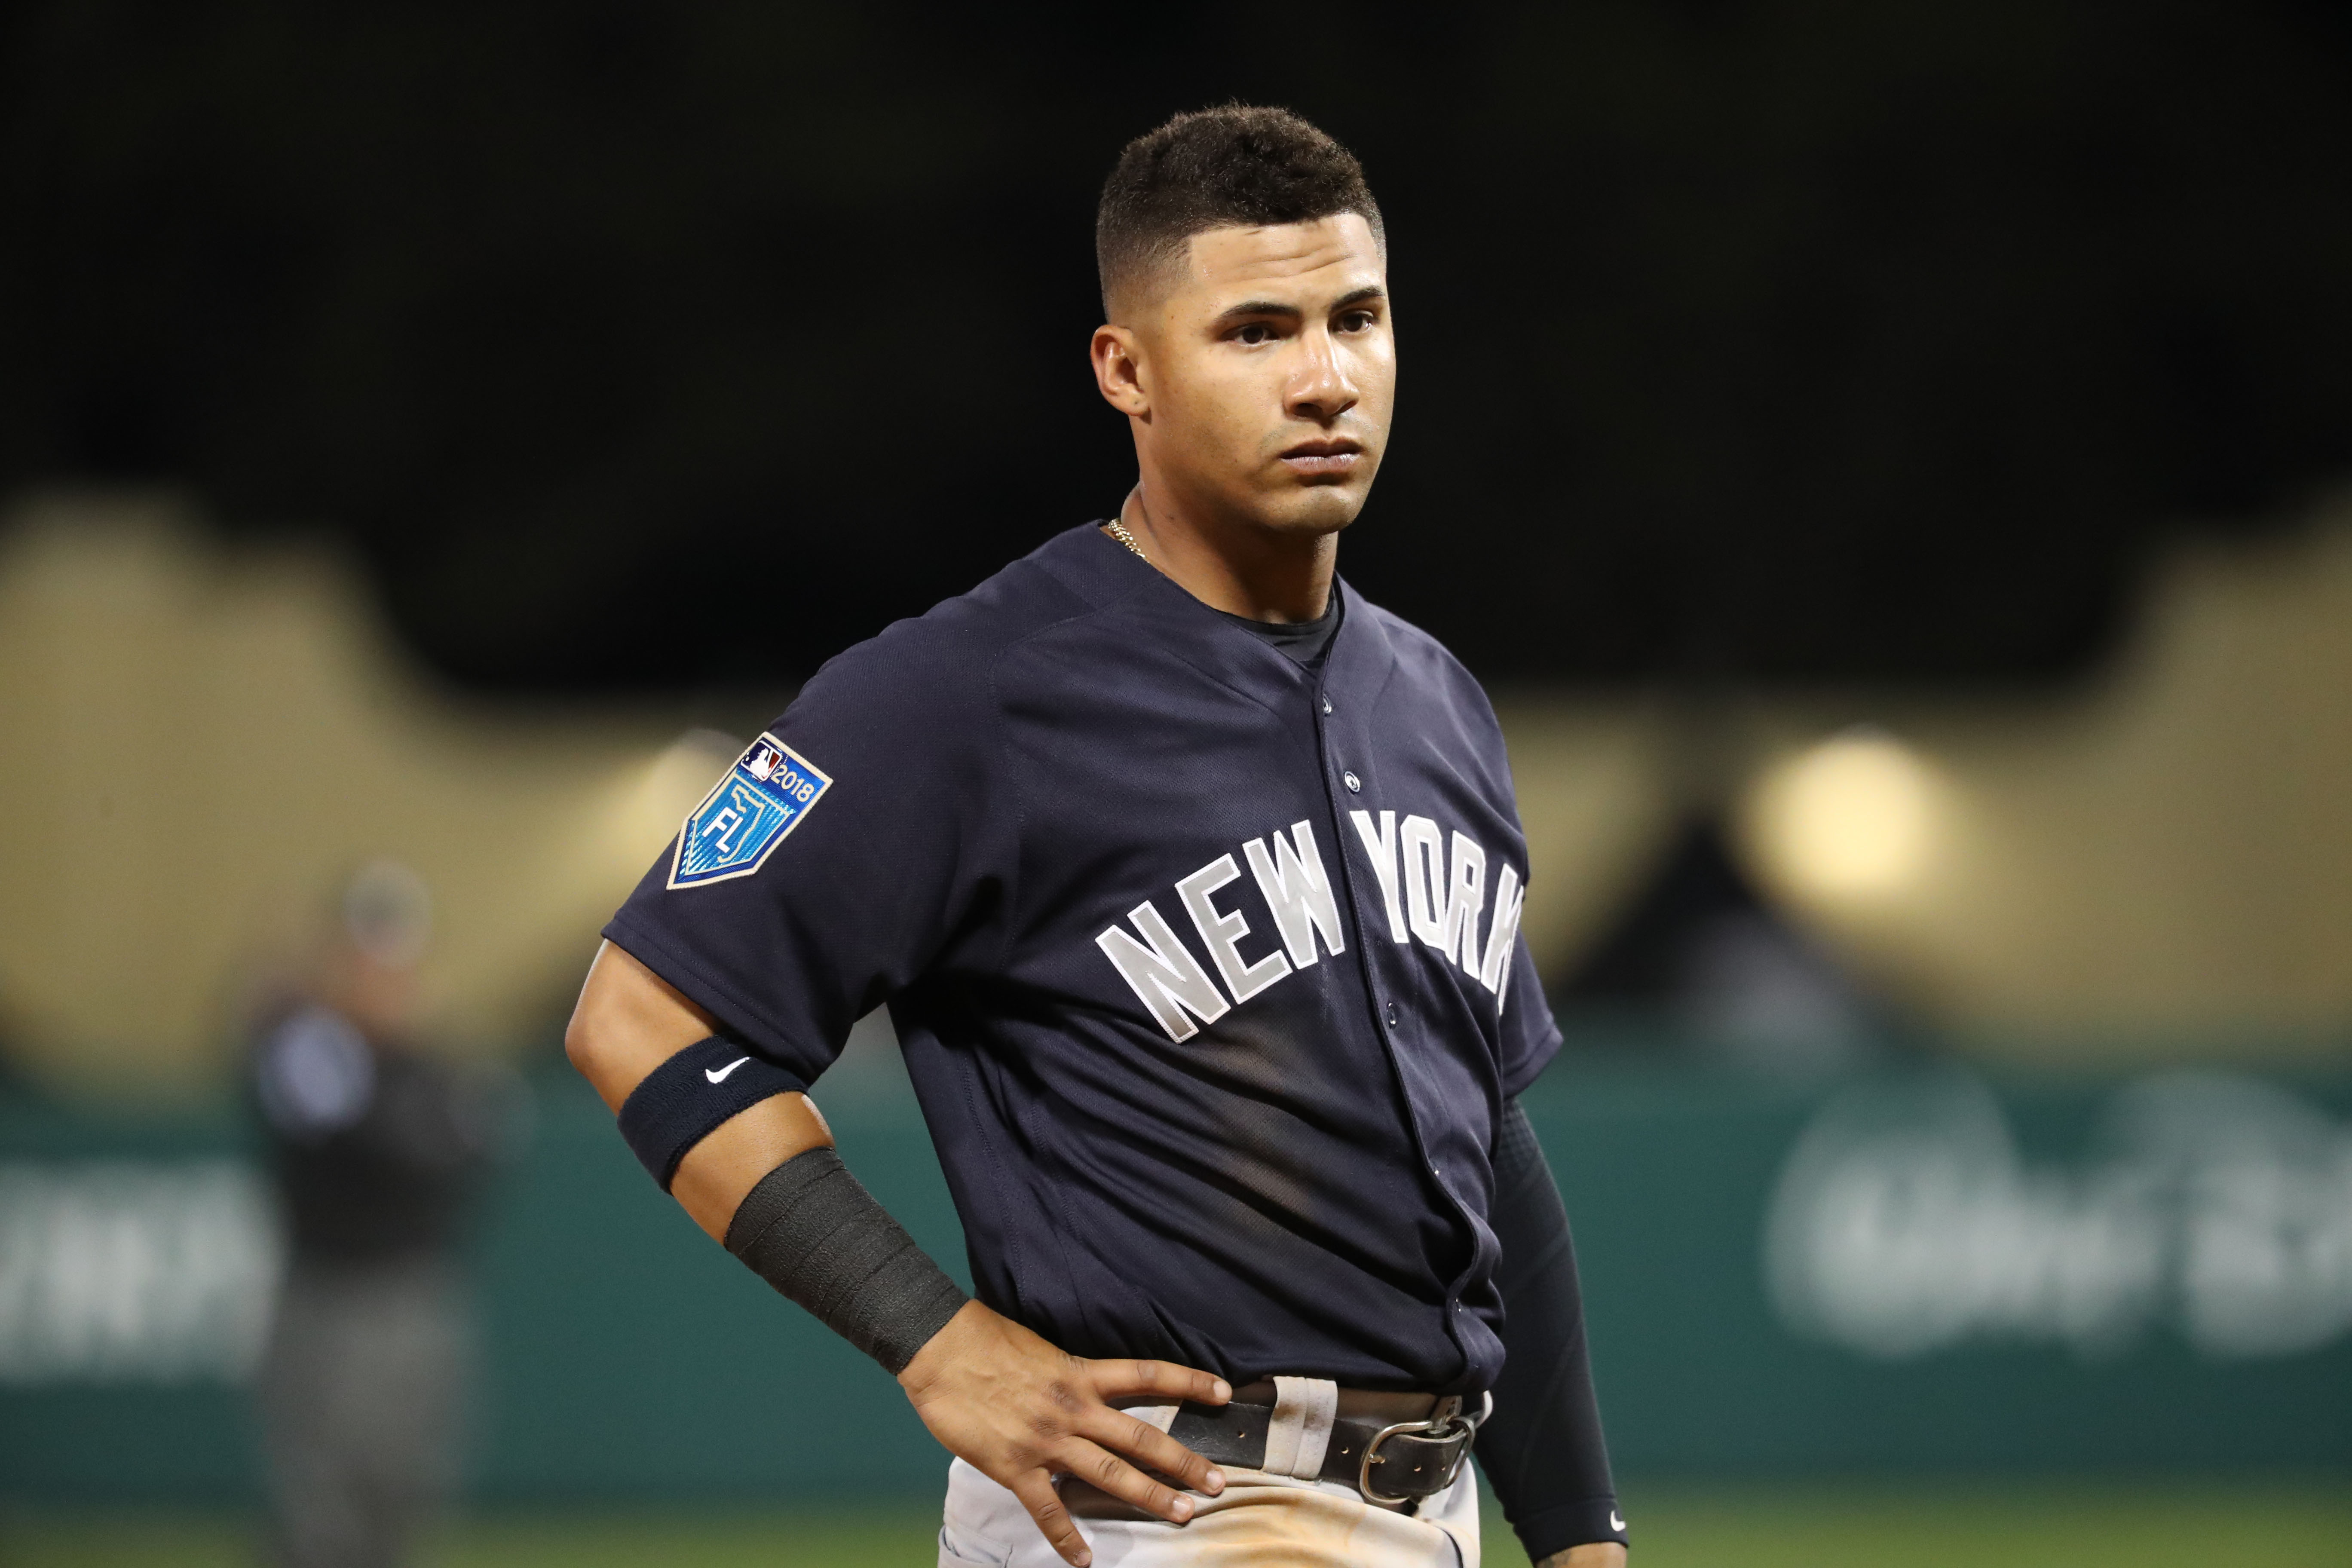 Gleyber Torres autos are tougher finds than other young Yankees